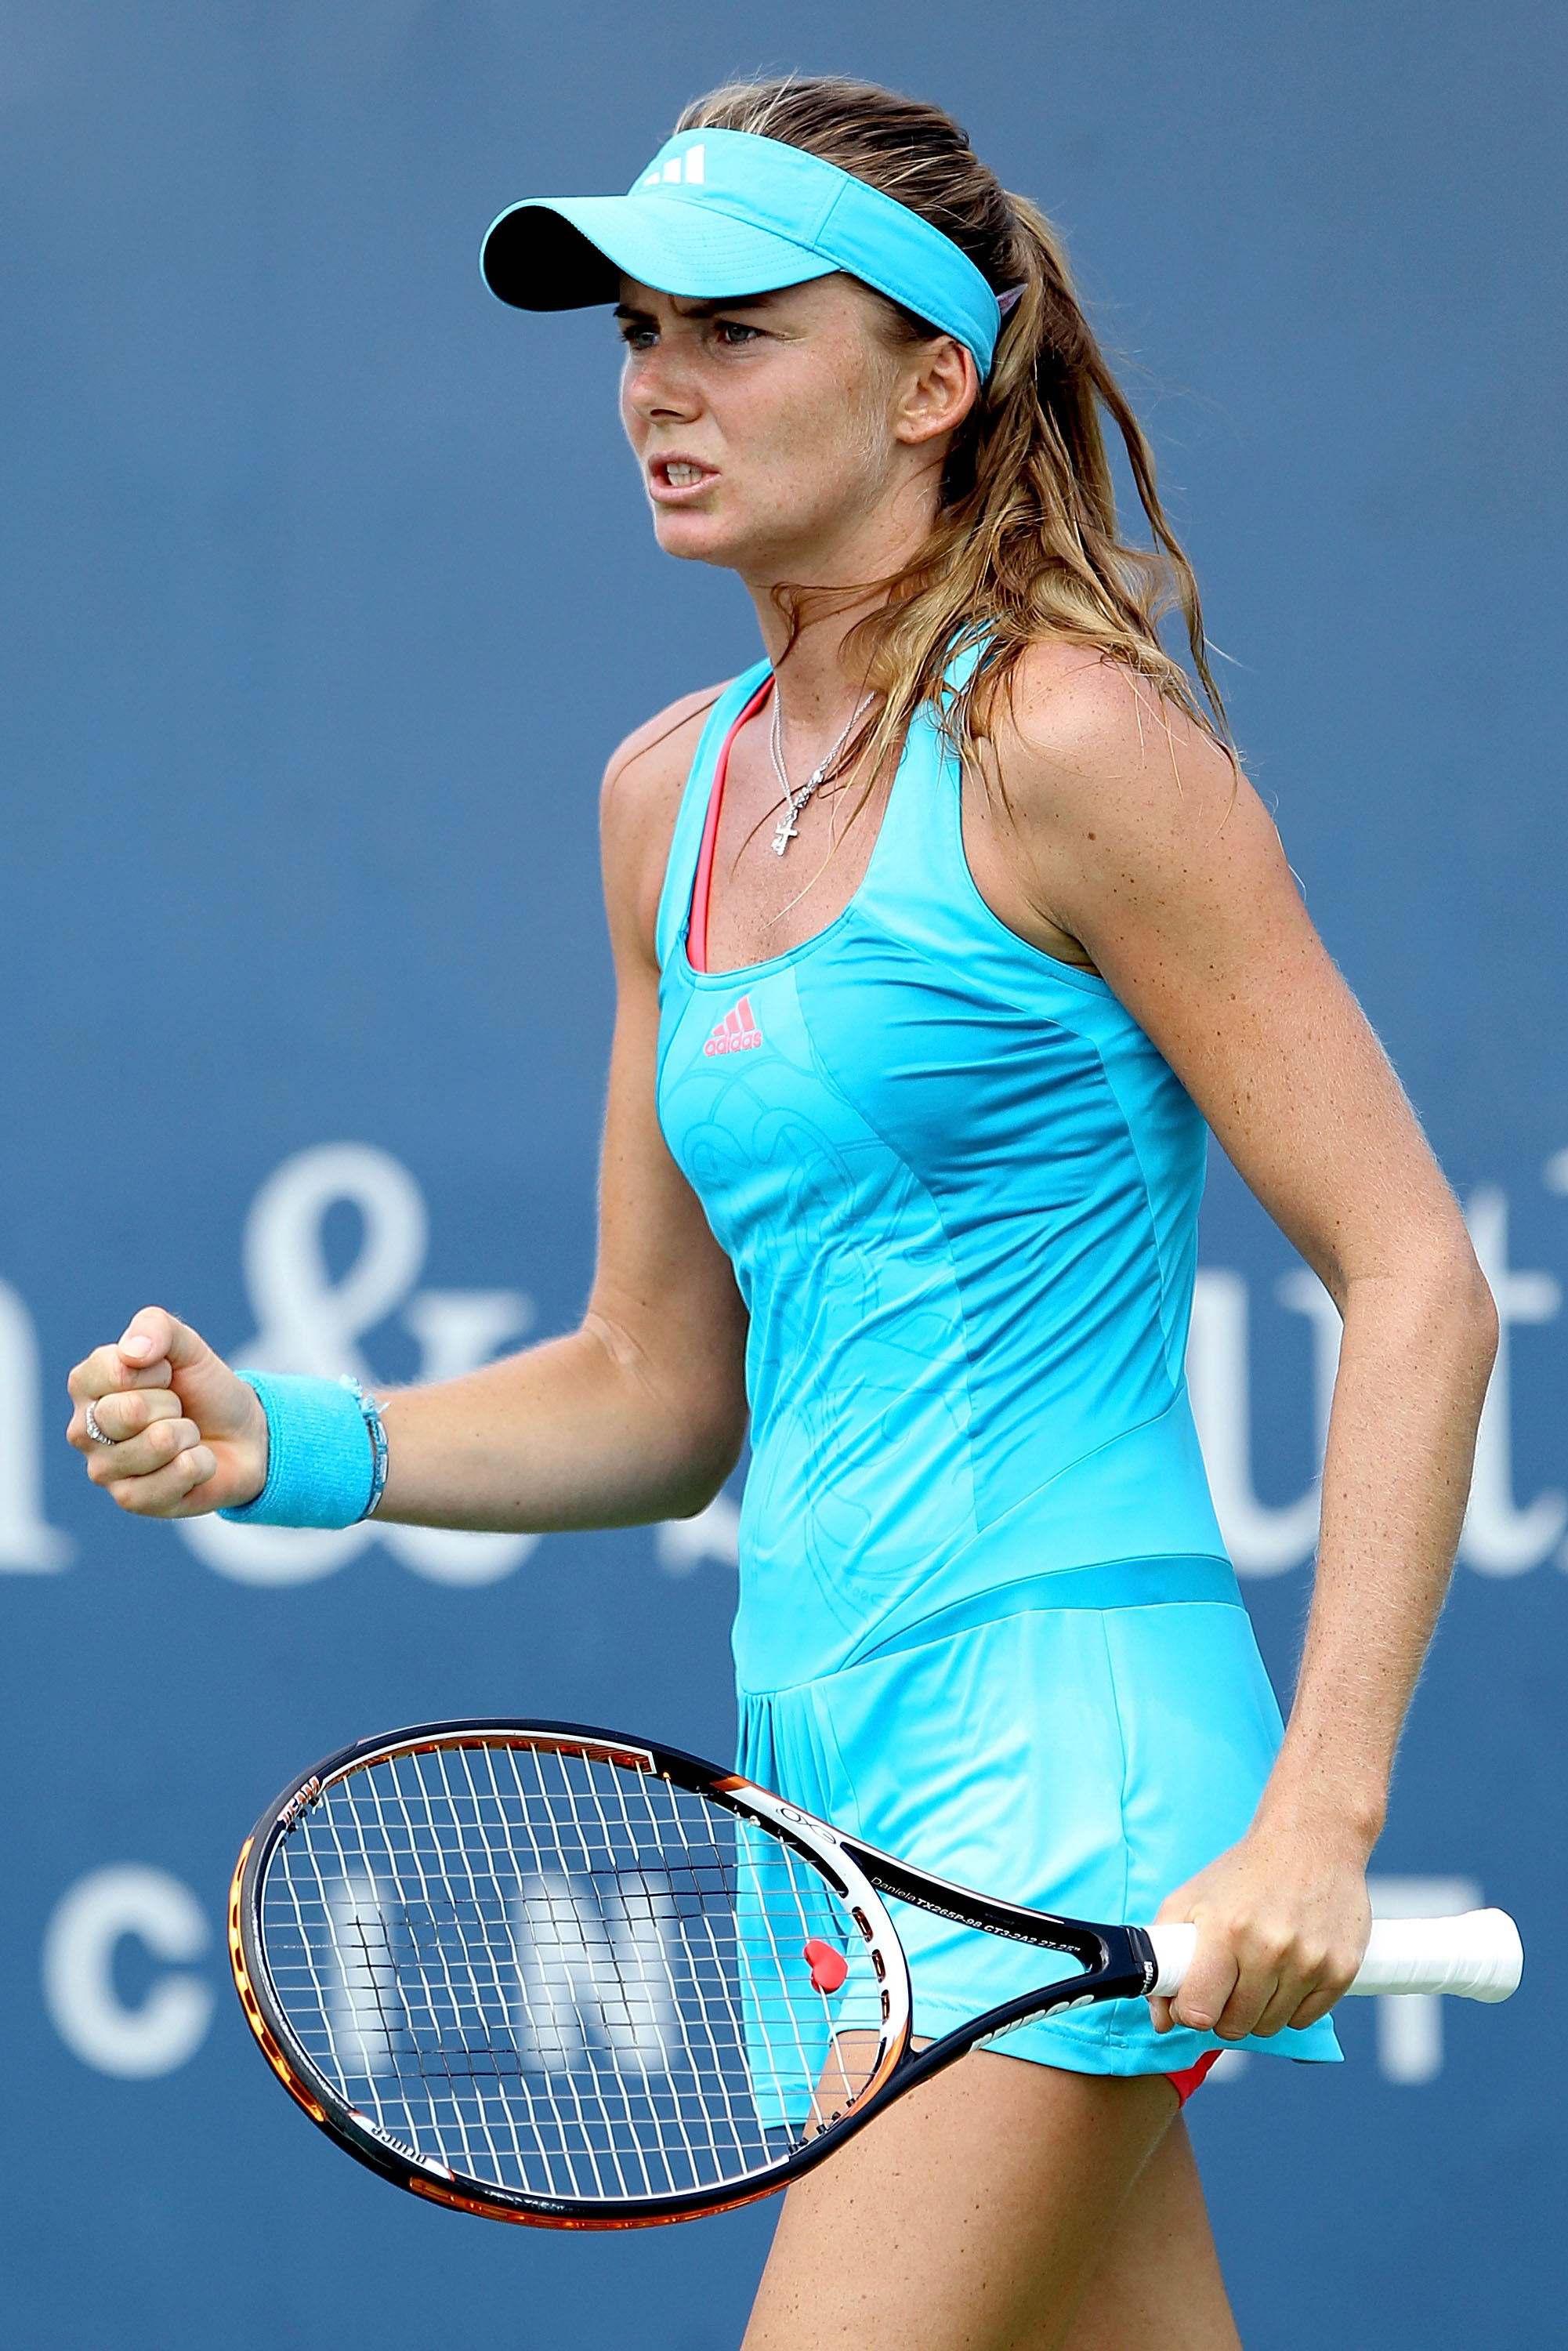 Daniela Hantuchova Celebrates Match Point During The Western And The Most Iconic And Stylish